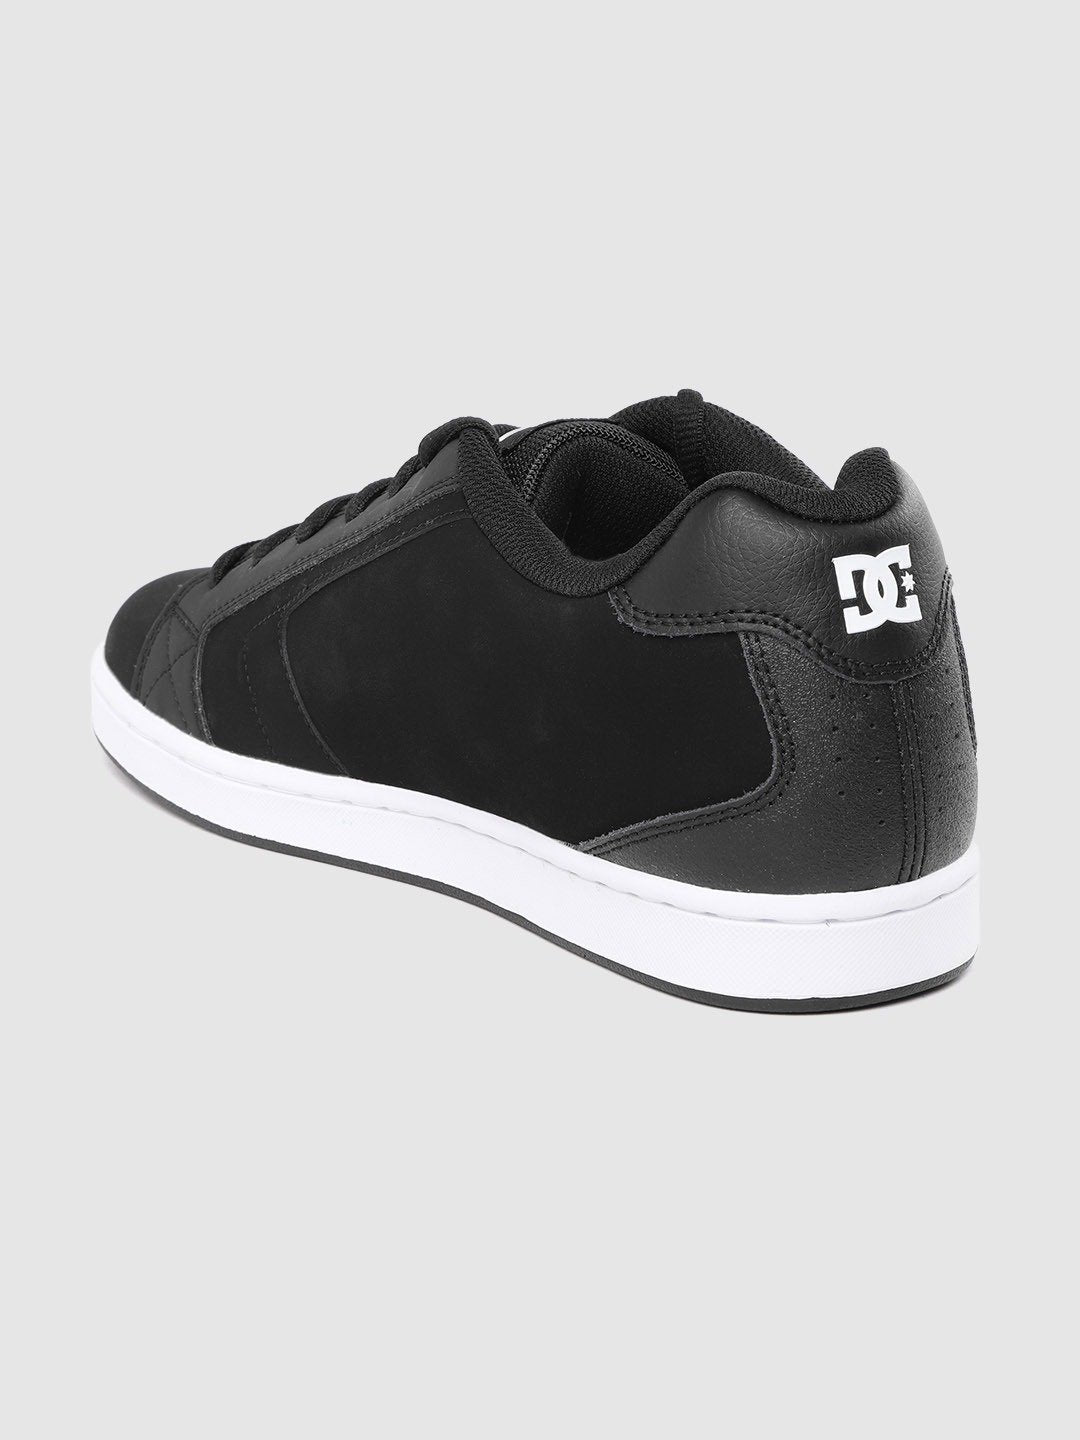 Men Black Solid Leather Sneakers - Discount Store